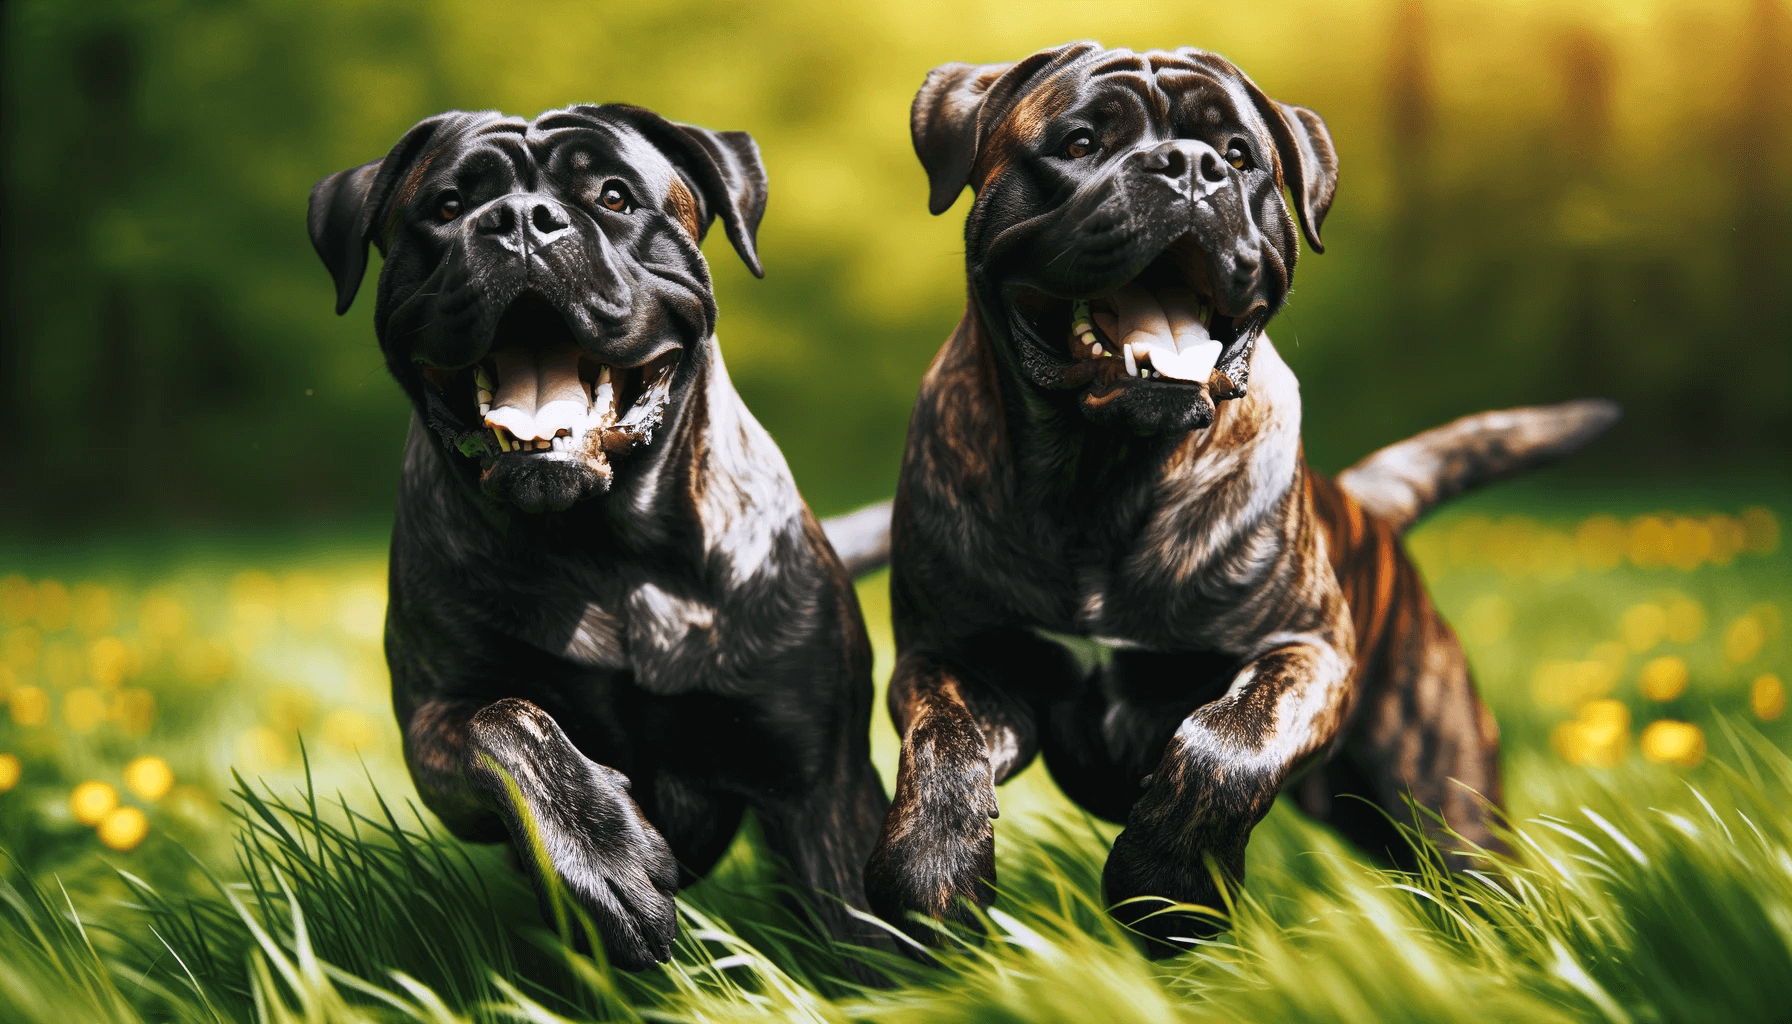 Two brindle Cane Corsos in a grassy field, possibly during playtime. Their dynamic poses and open mouths suggest active play and enjoyment.